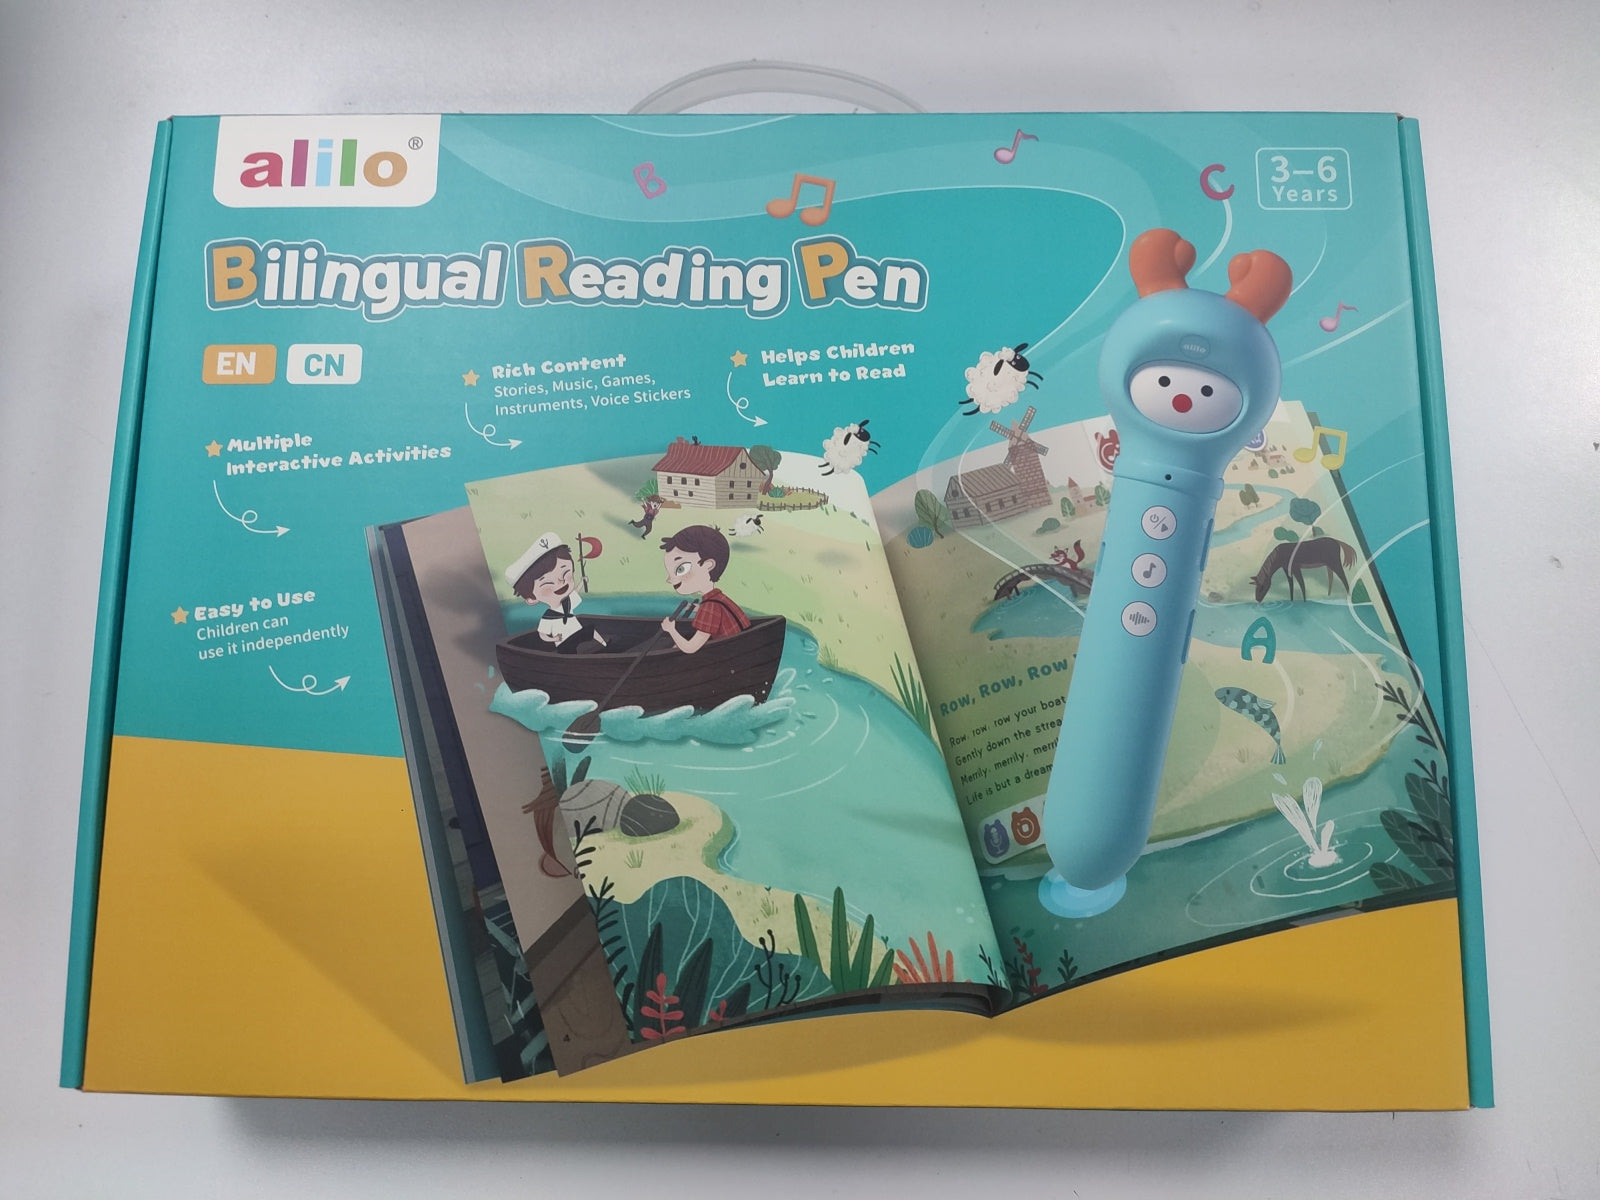 Alilo Early Educational Talking Pen (Bilingual - English and Chinese)